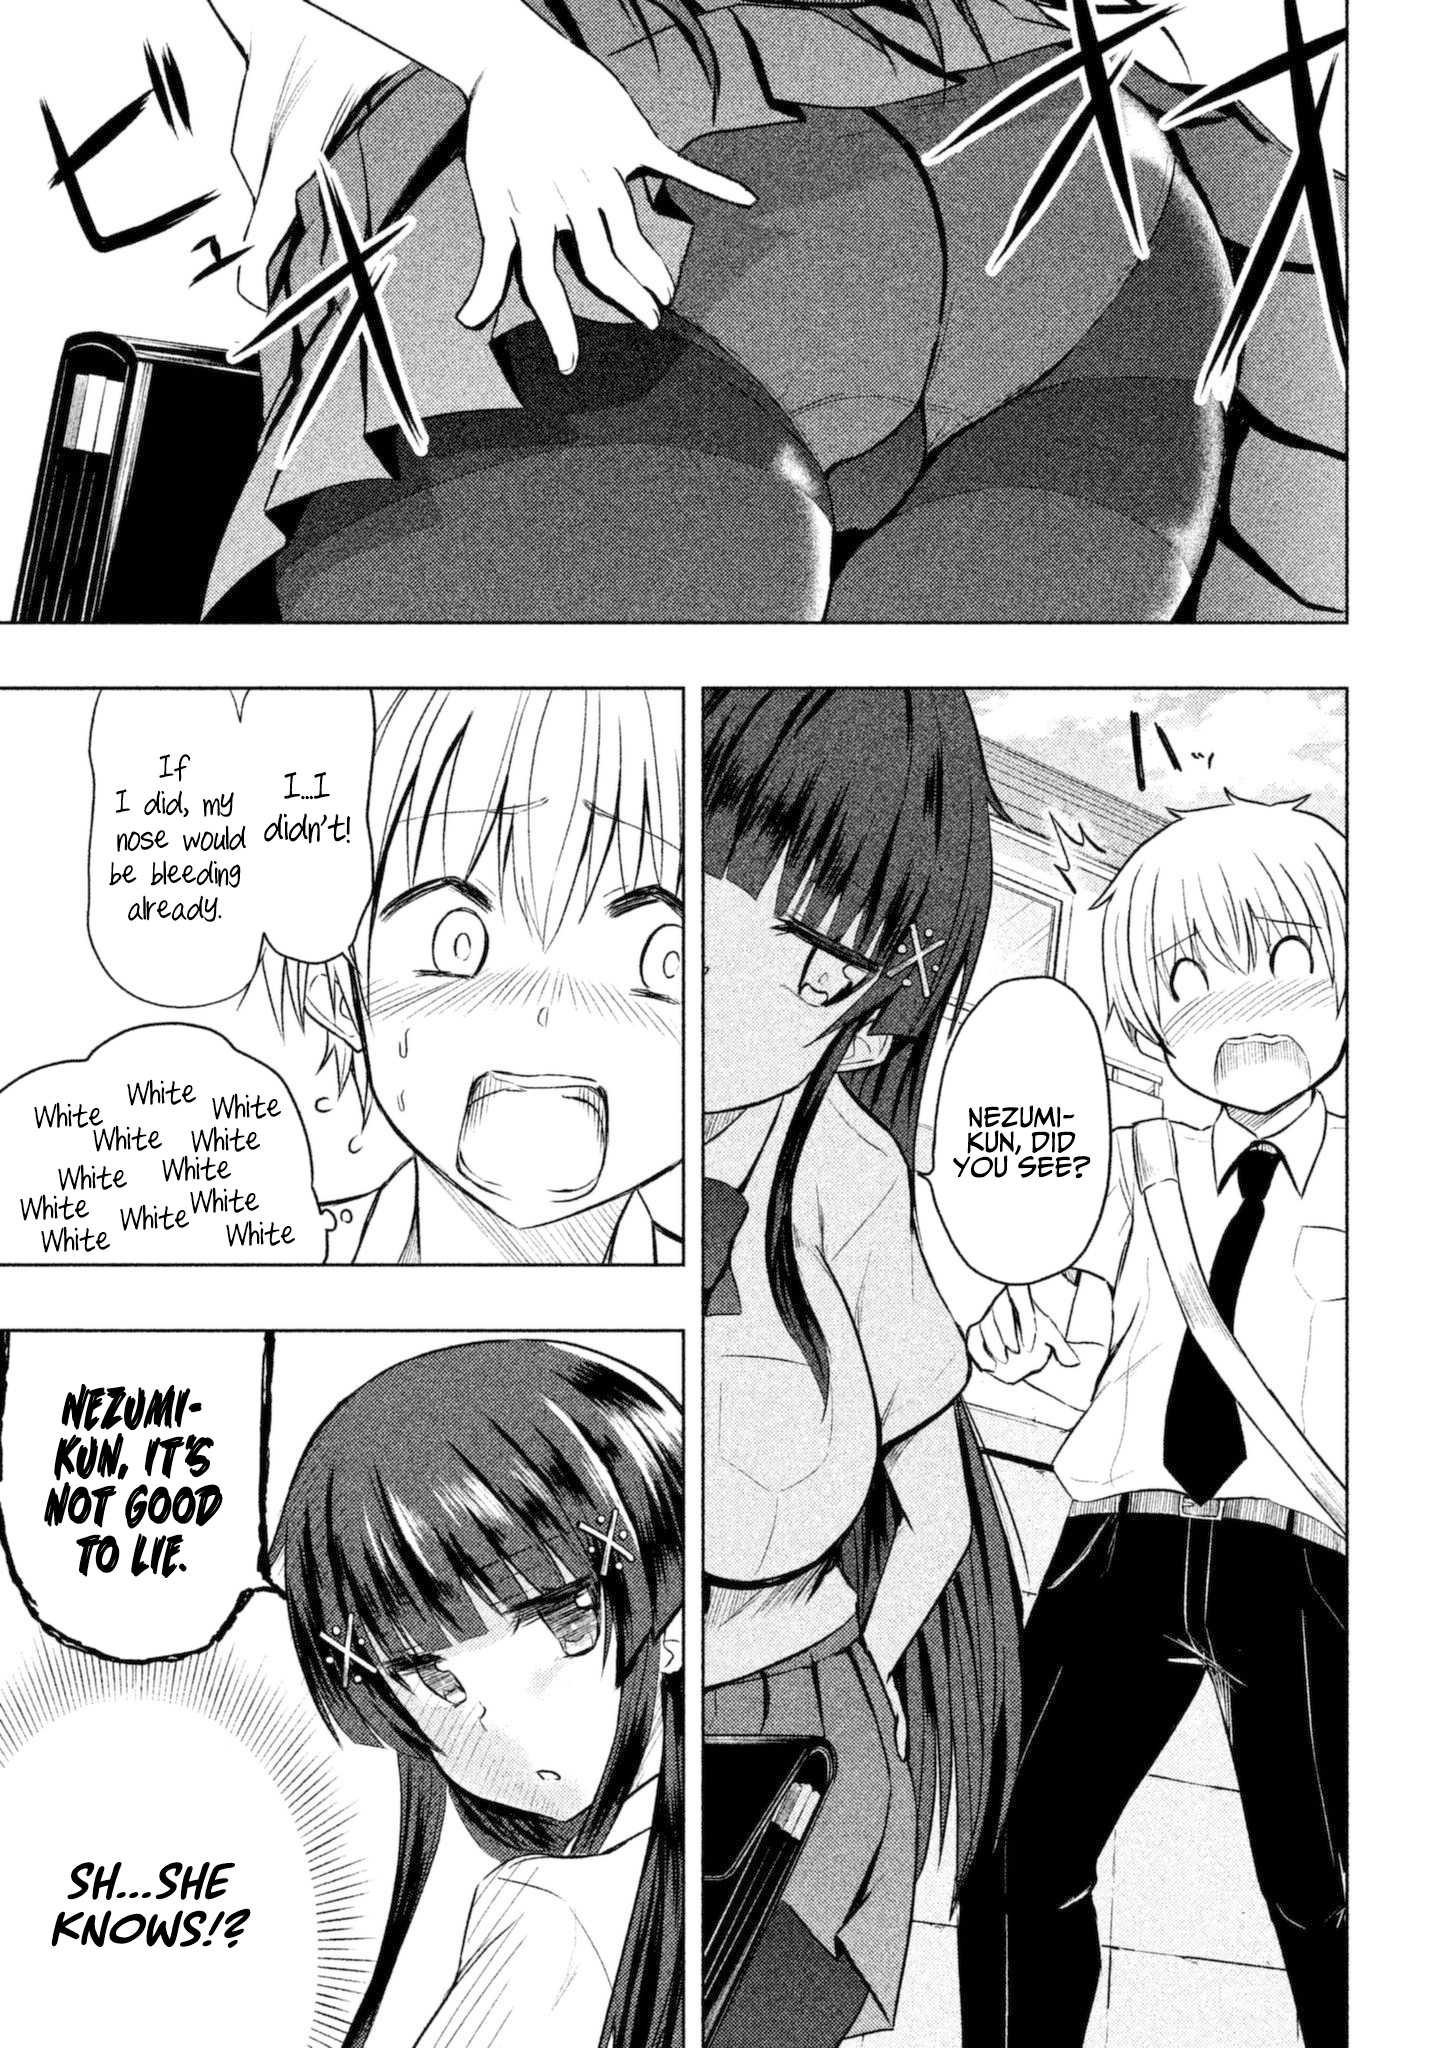 A Girl Who Is Very Well-Informed About Weird Knowledge, Takayukashiki Souko-san - chapter 5 - #2